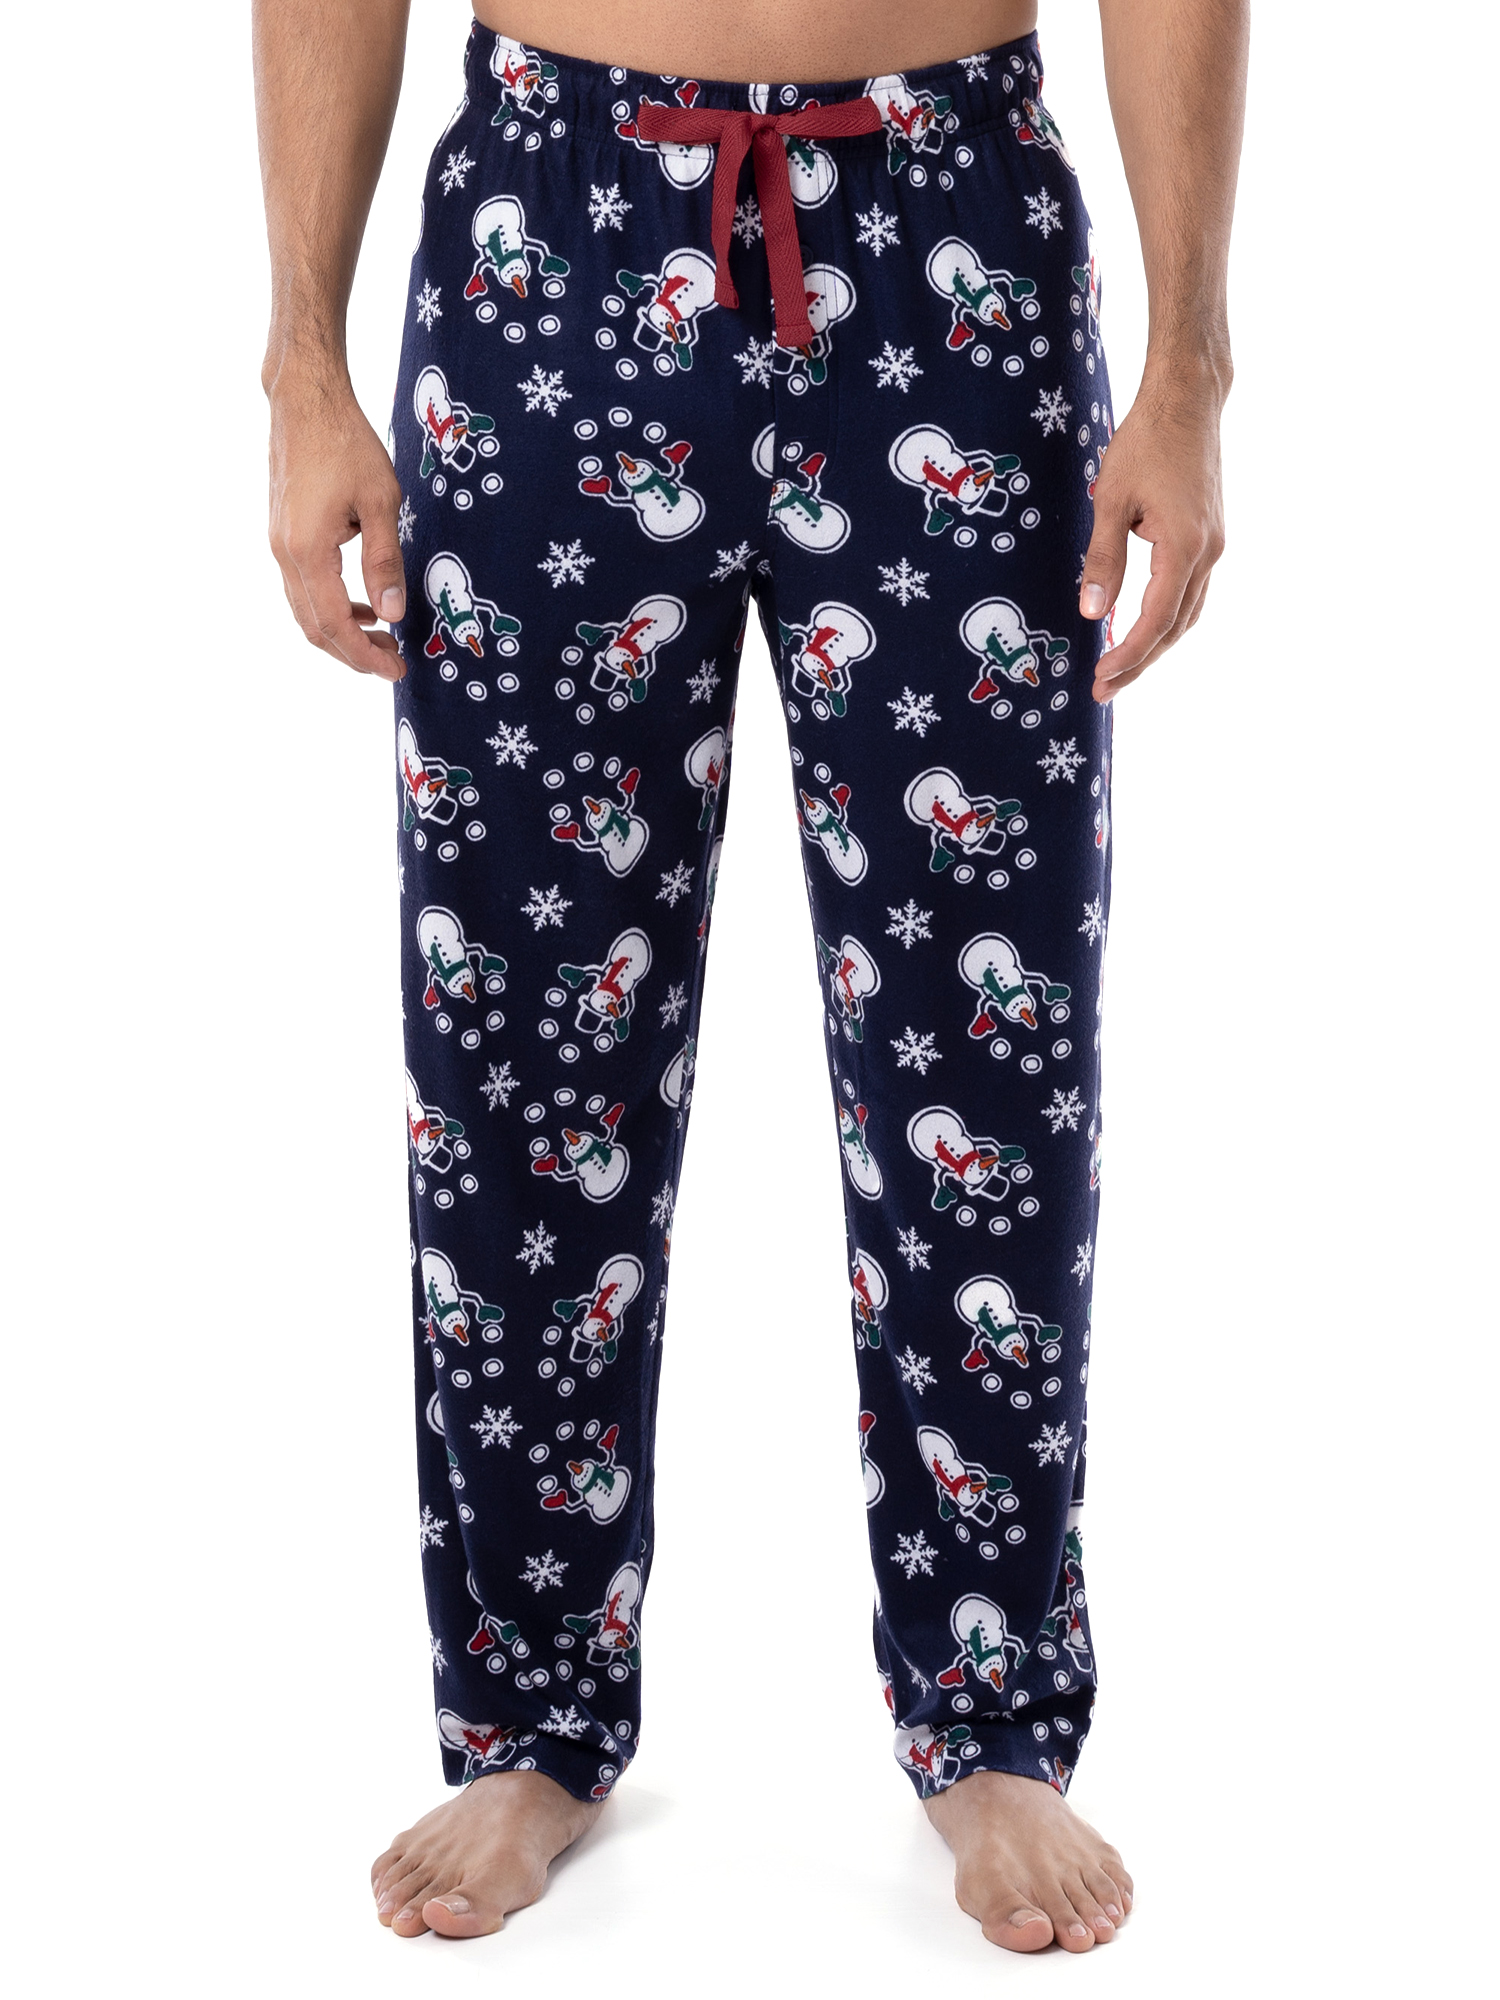 Fruit of the Loom Men's Holiday and Plaid Print Soft Microfleece Pajama Pant 2-Pack Bundle - image 4 of 15